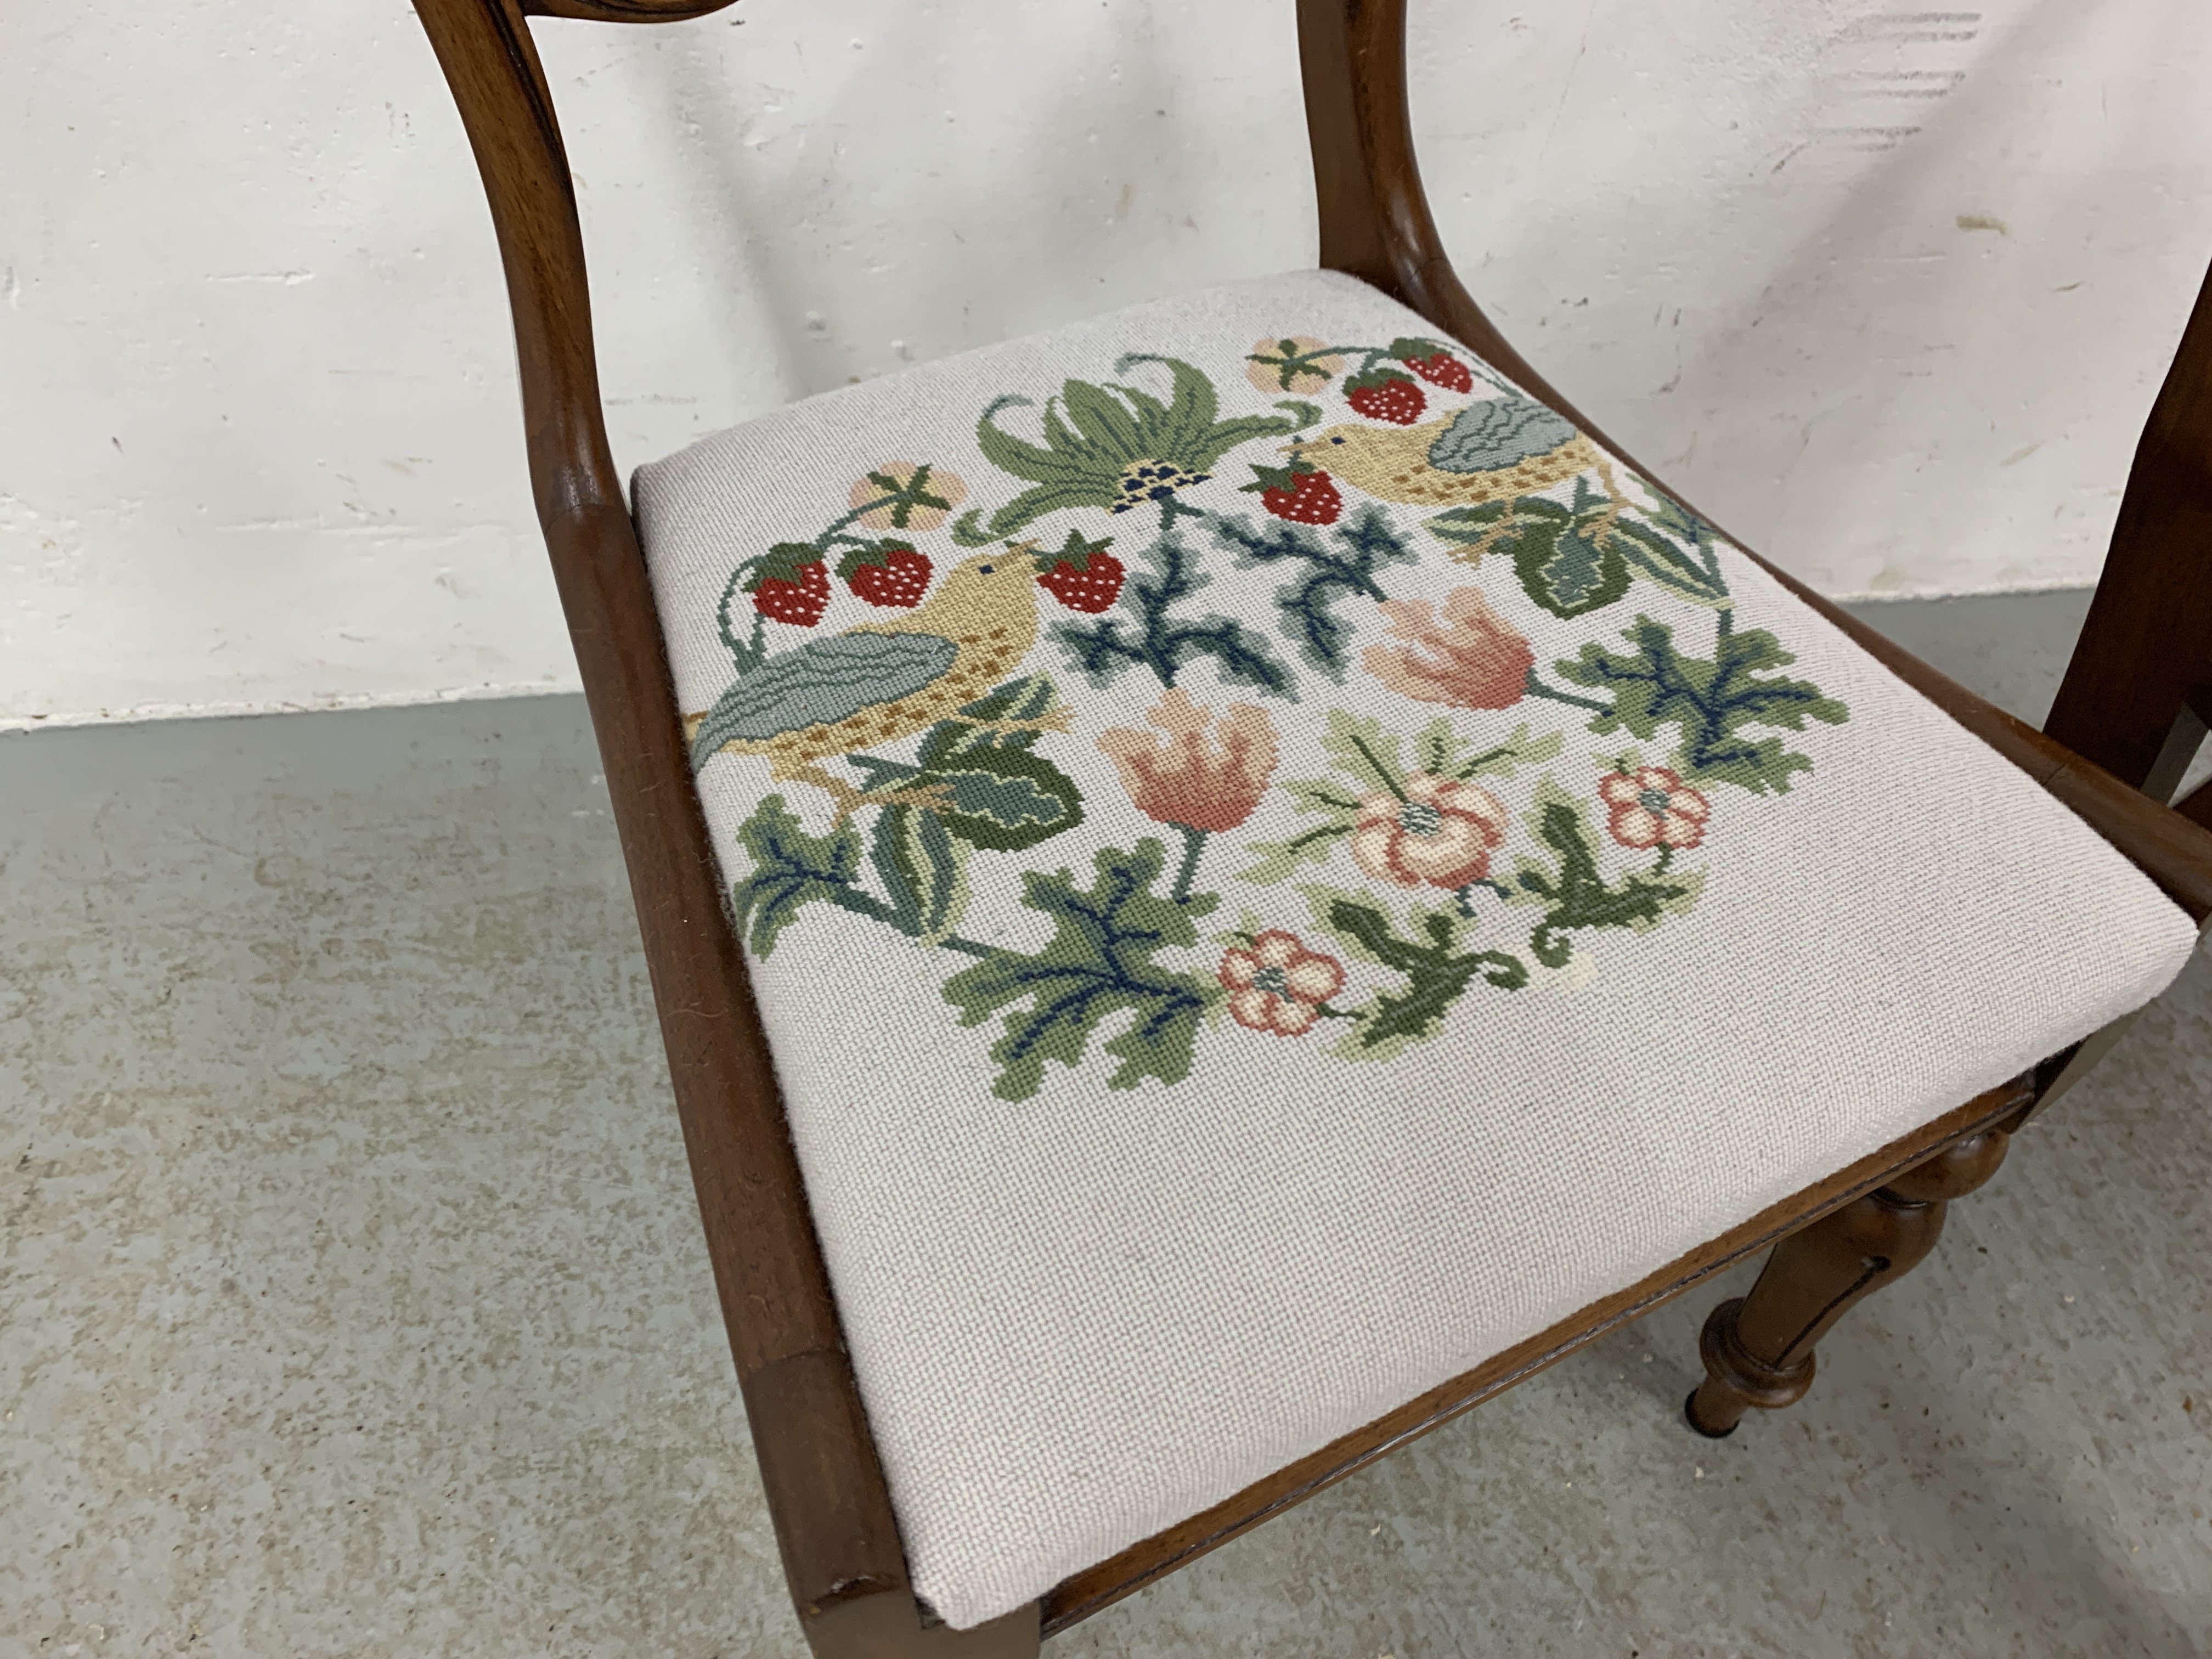 A PAIR OF VICTORIAN SIDE CHAIRS WITH HAND EMBROIDERED DROP IN SEATS. - Image 5 of 9